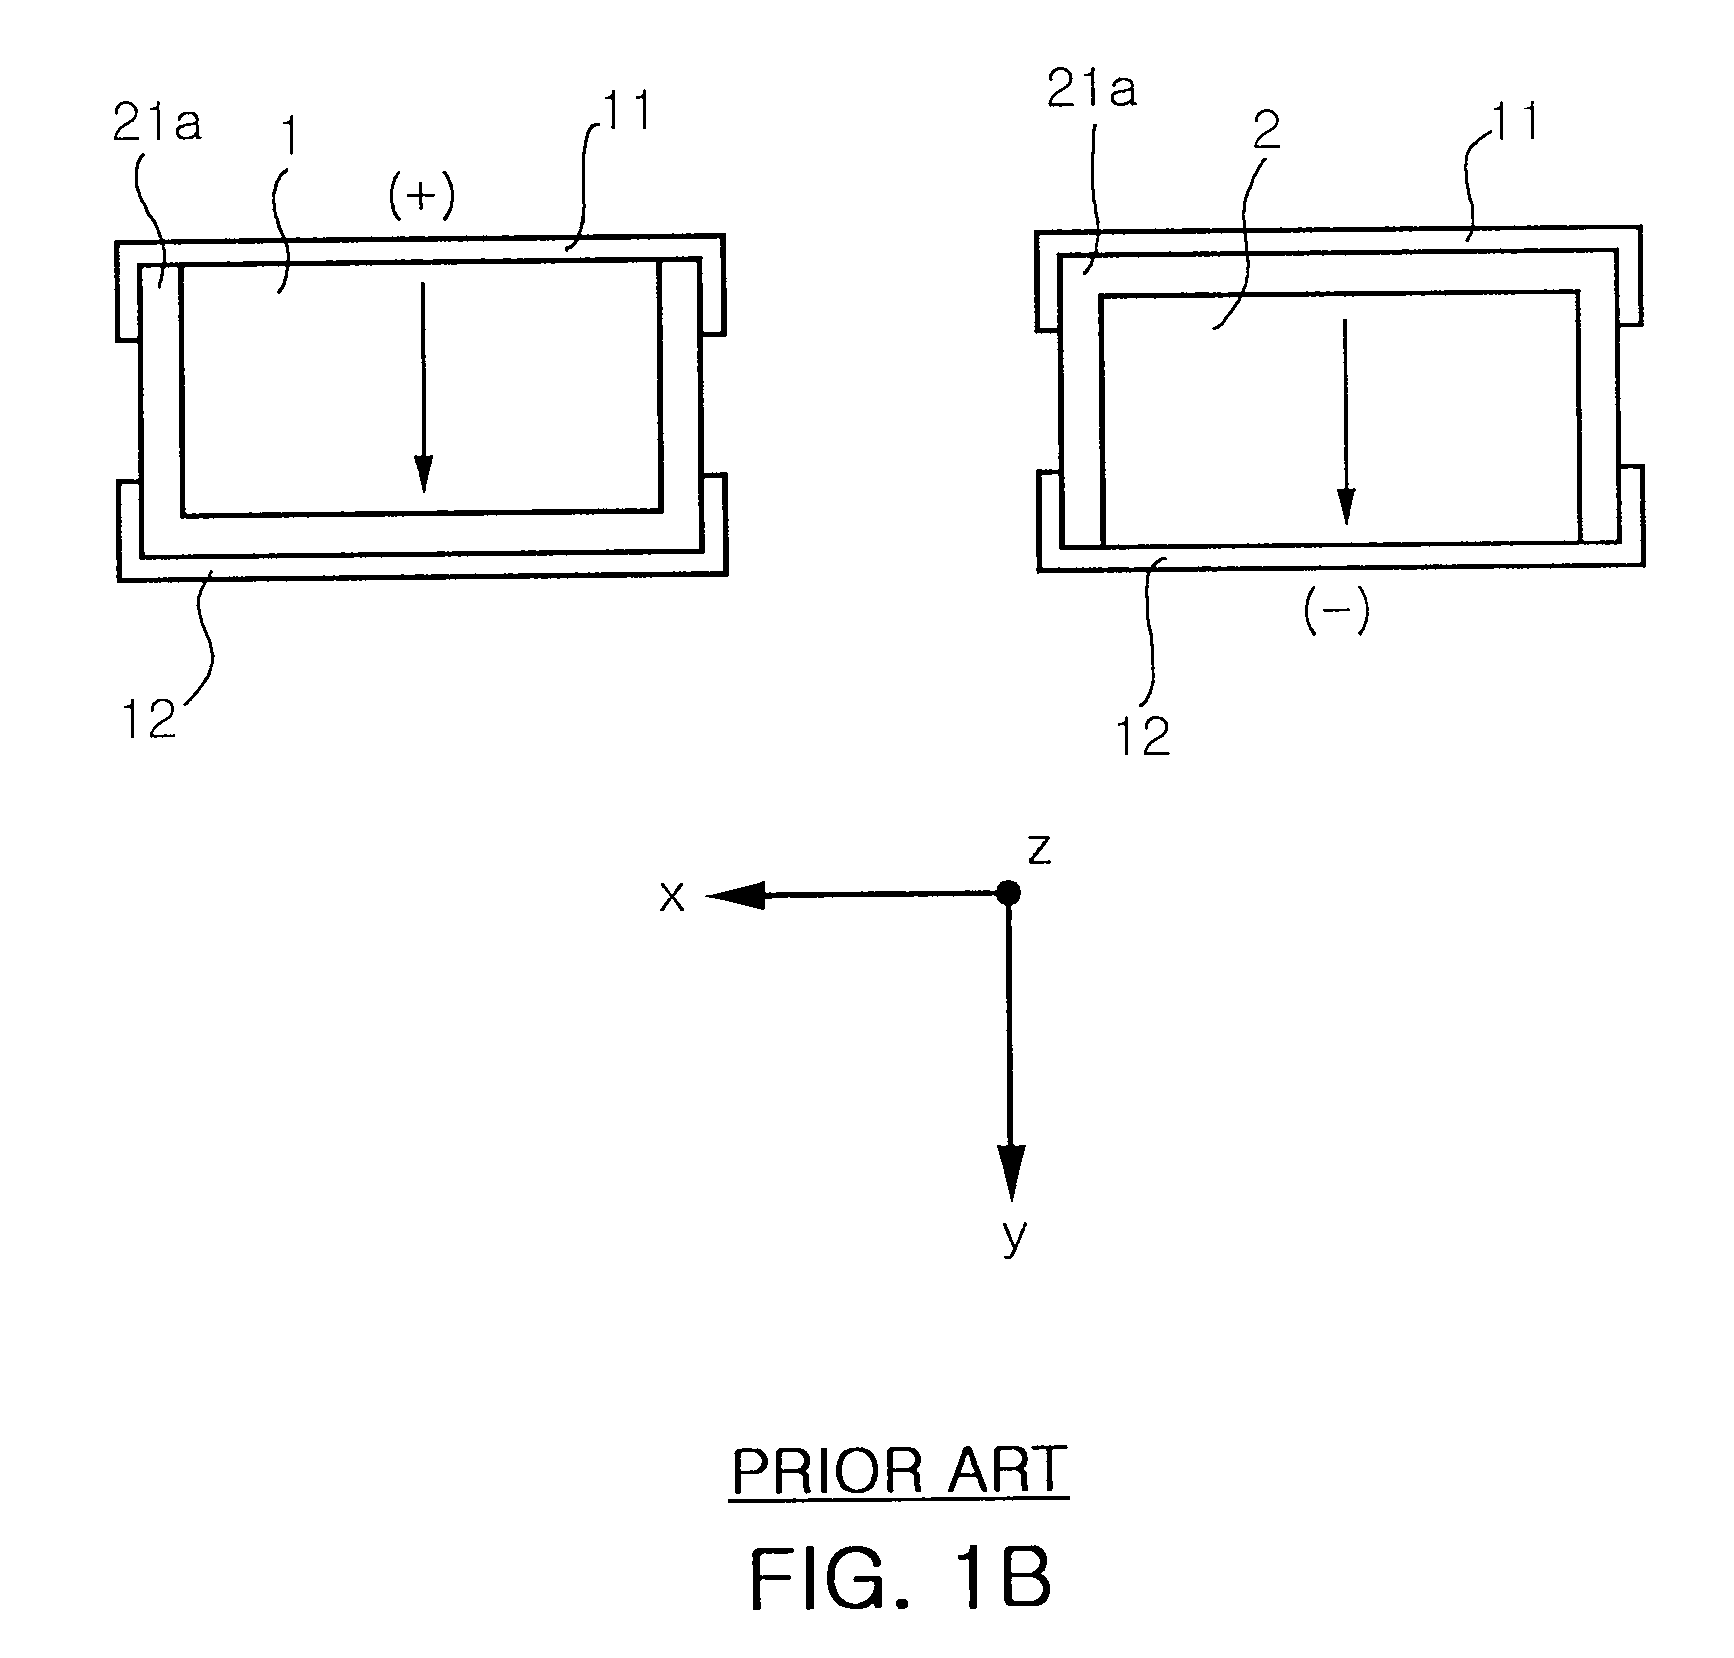 Multilayer chip capacitor including two terminals